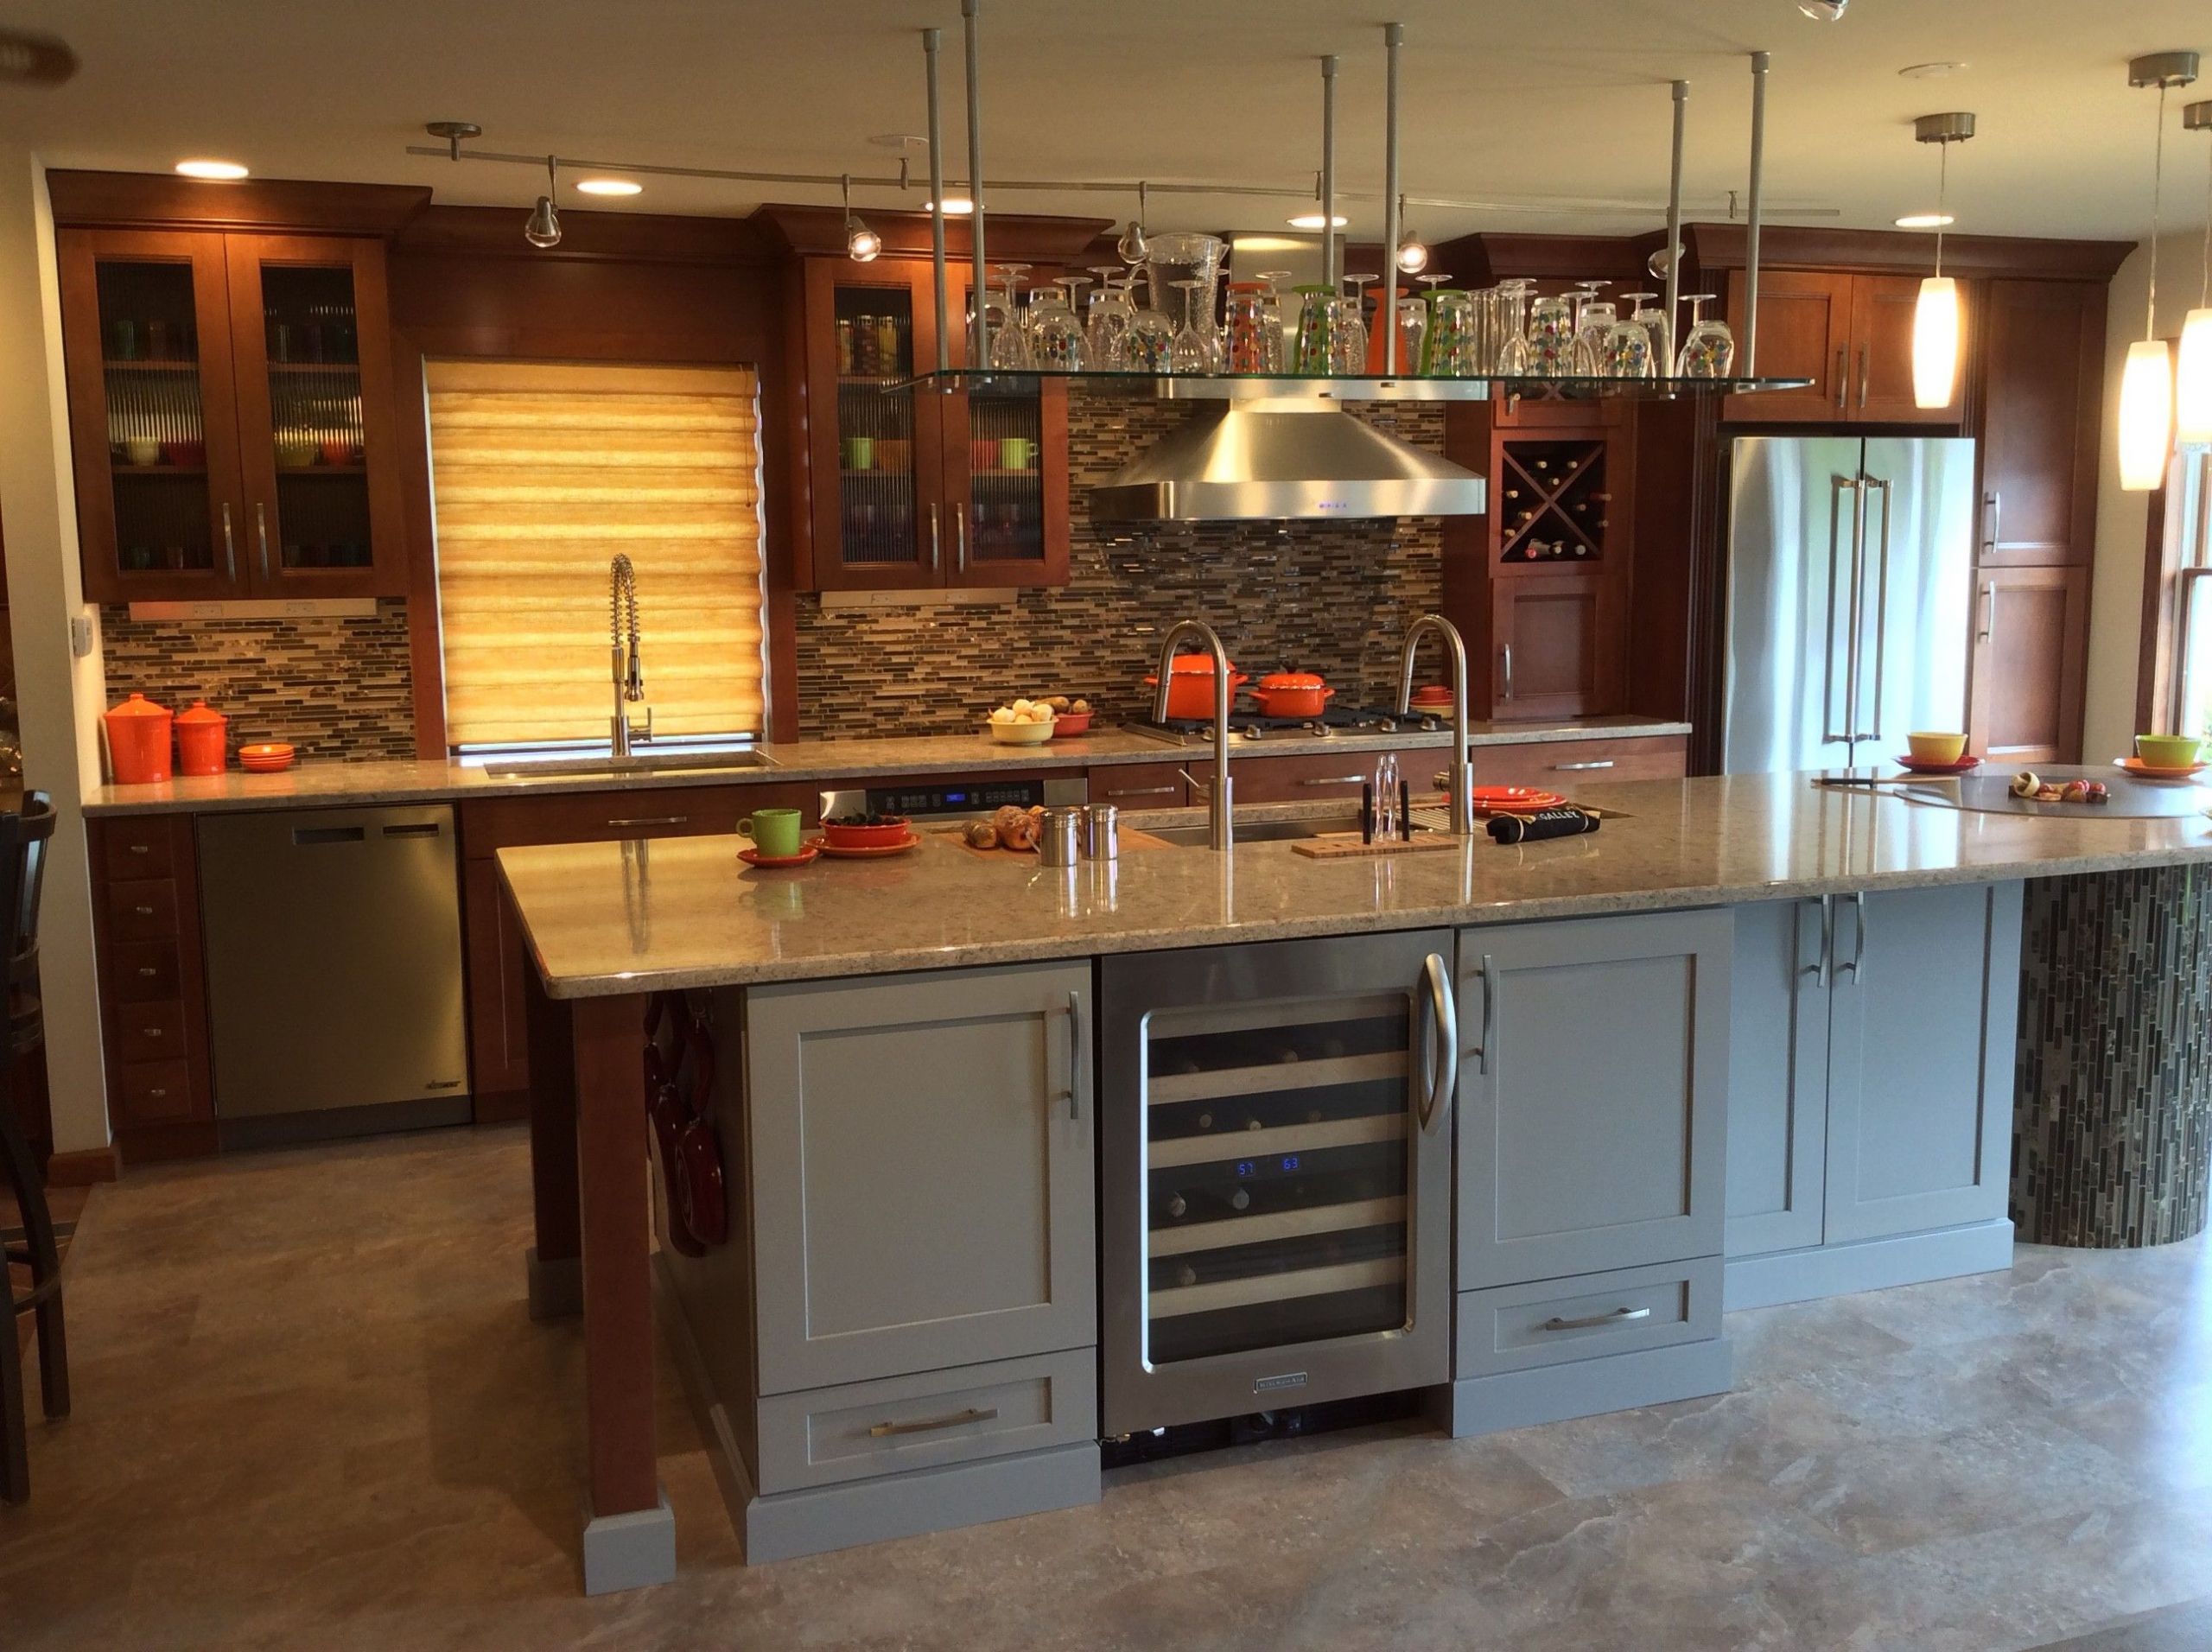 Home Depot Kitchen Remodel Cost
 How Much Does A New Kitchen Cost